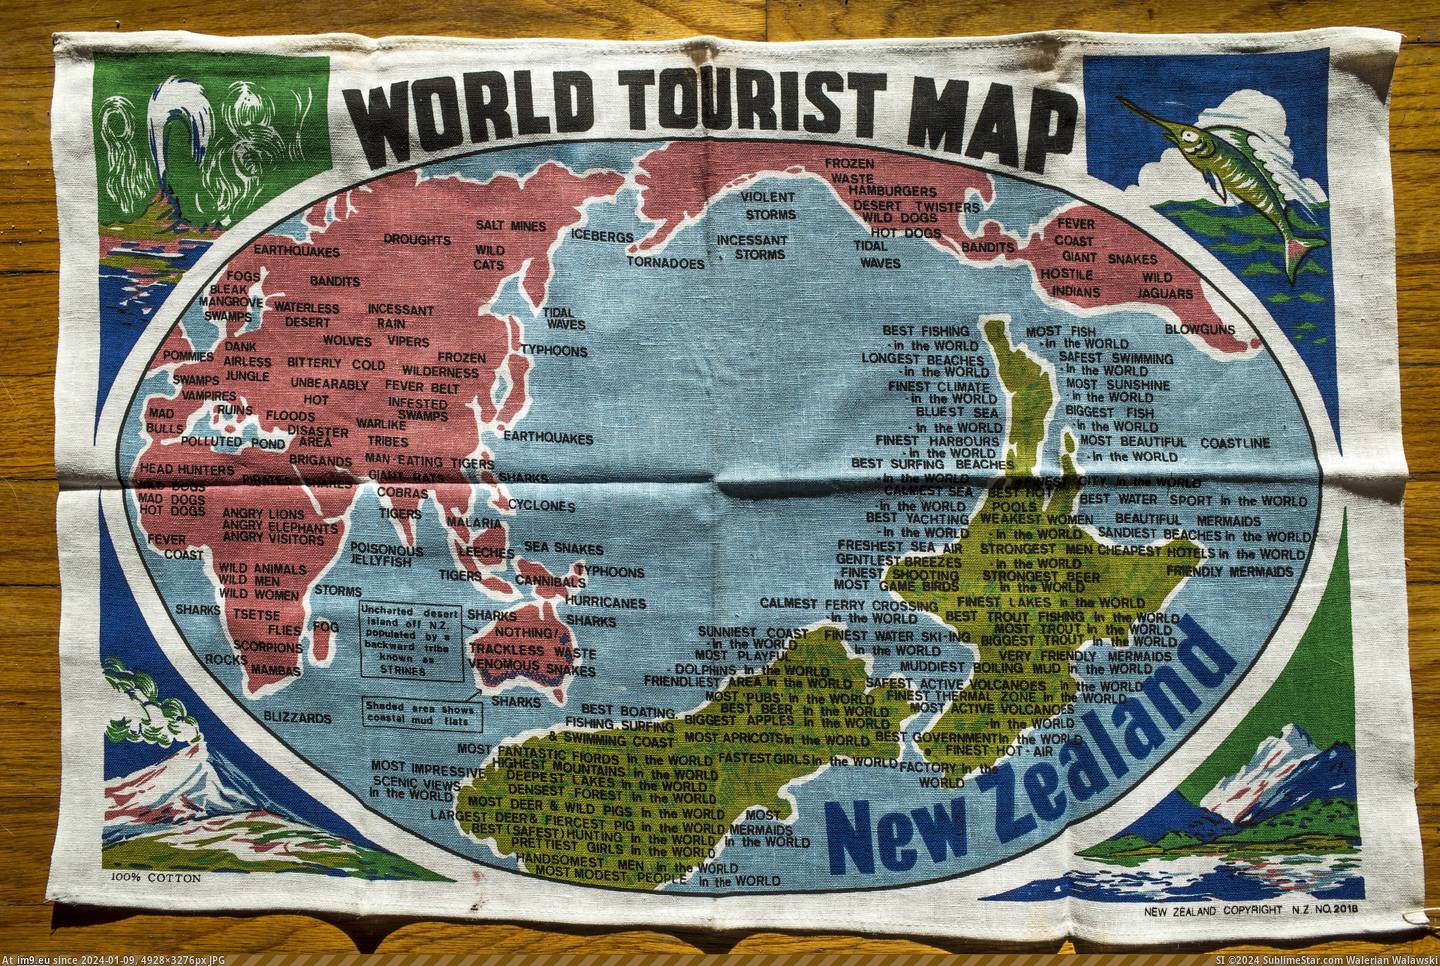 #World #Map #4928x3264 #Zealand #Perspective [Mapporn] World Tourism Map, New Zealand's perspective [4928x3264] Pic. (Image of album My r/MAPS favs))